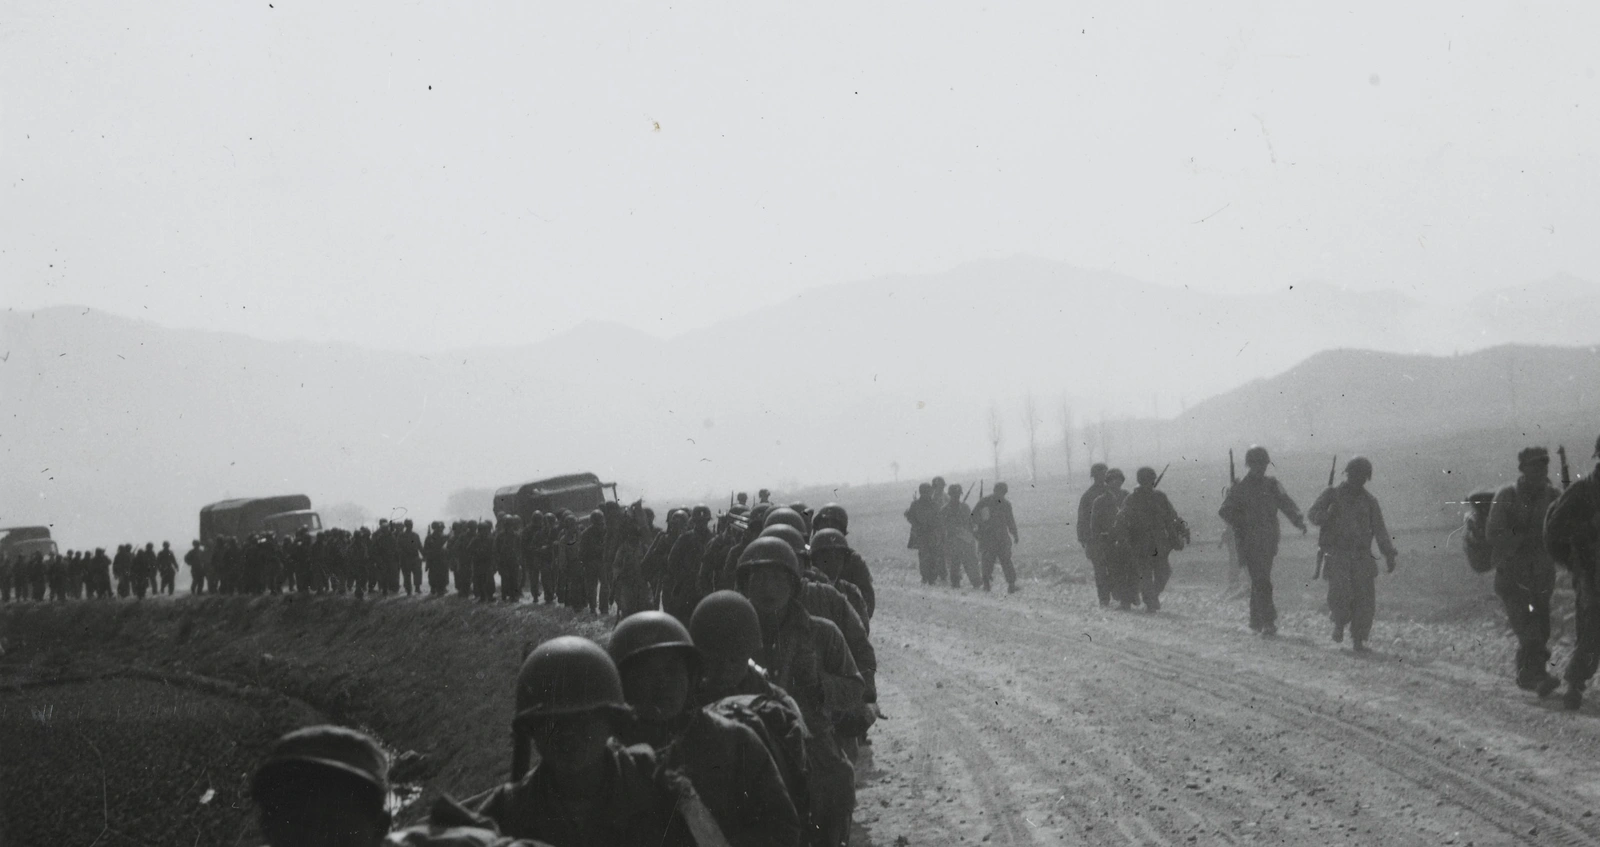 American soldiers march north, 1950 - Image courtesy of the National Army Museum, London